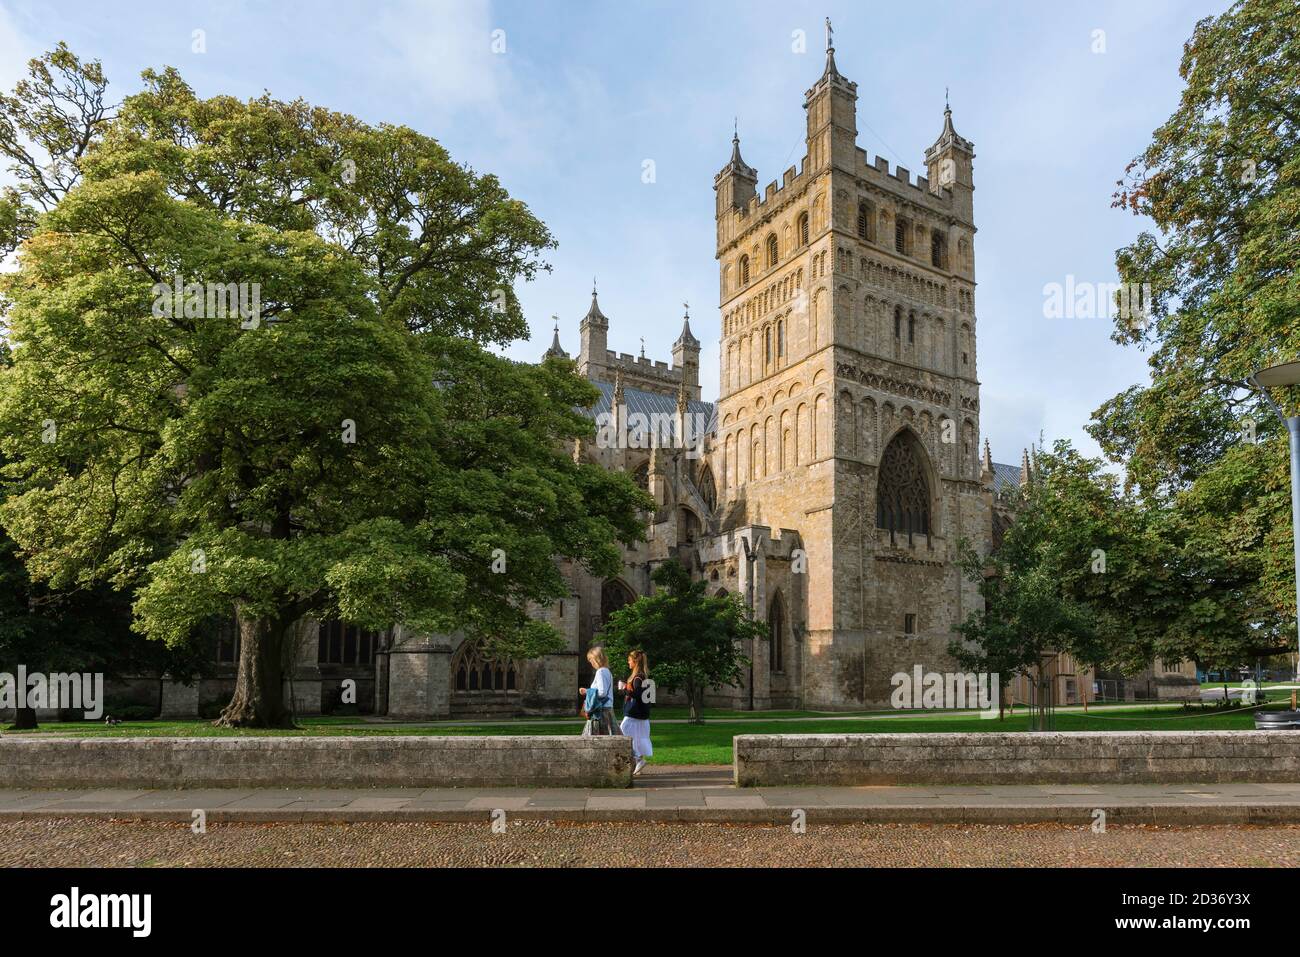 Women friends, view of two female friends exploring the grounds of the early medieval cathedral in the city of Exeter, Devon, England, UK Stock Photo